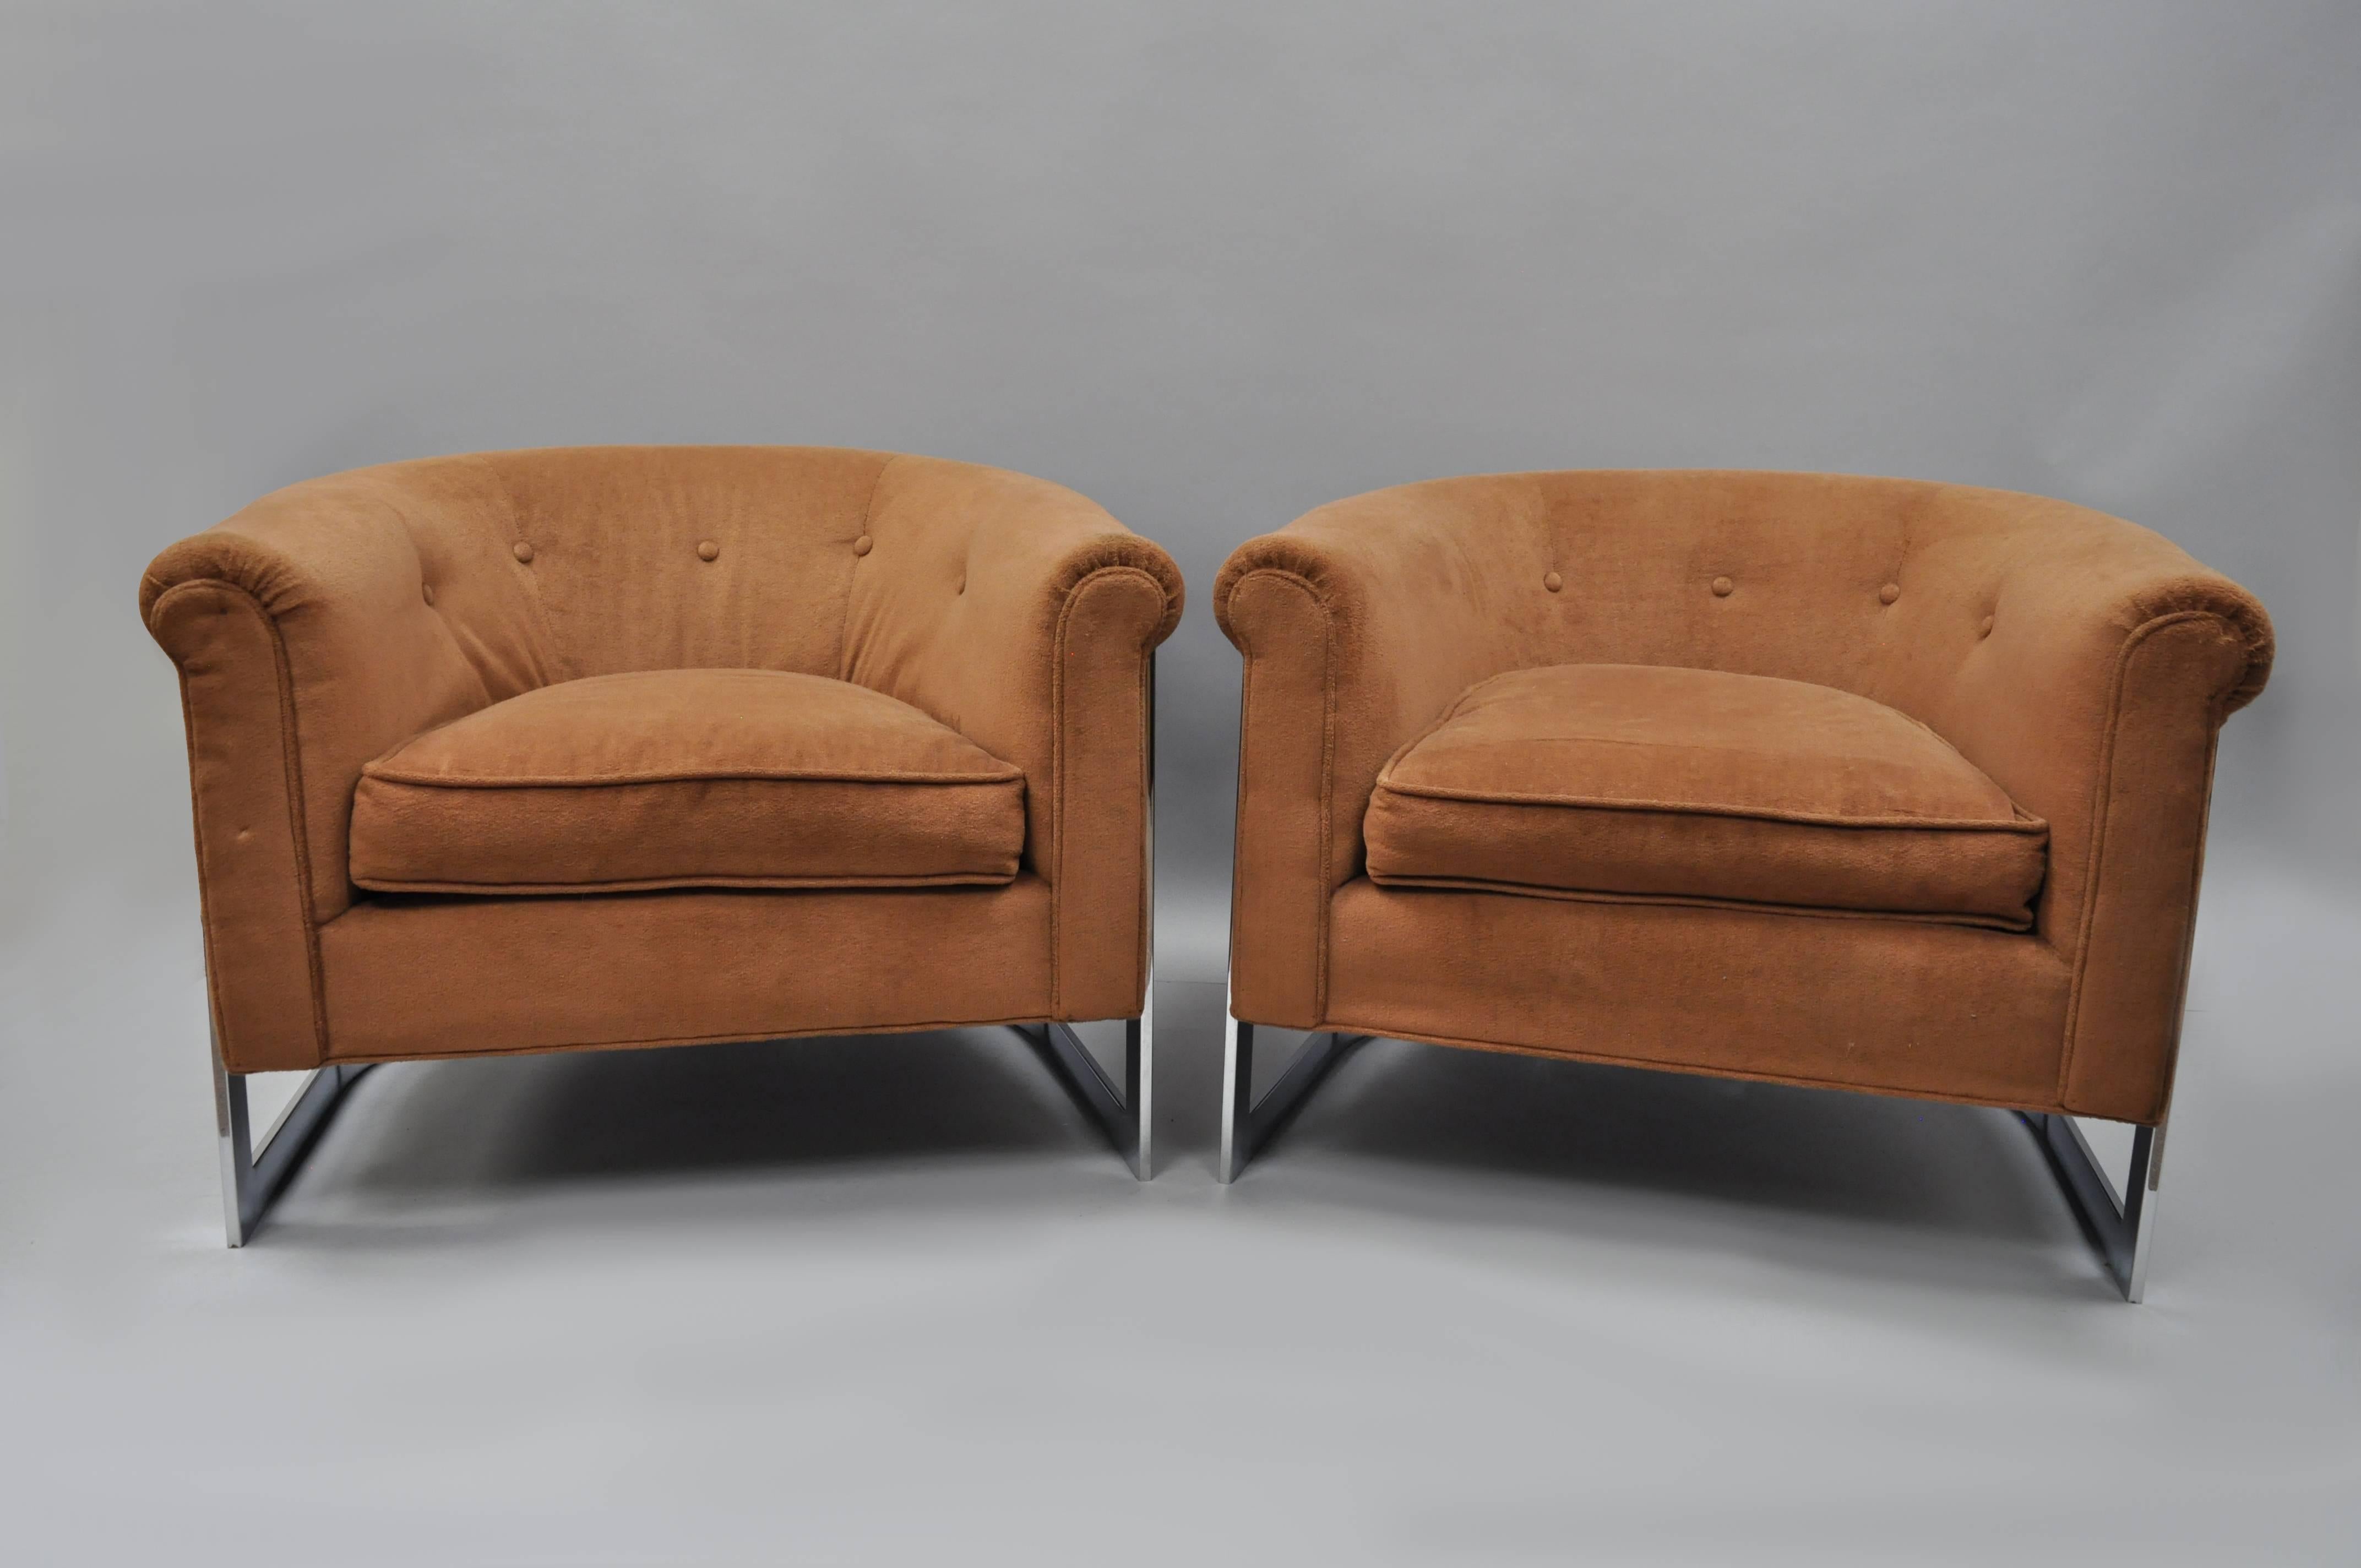 Pair of vintage Mid-Century Modern Milo Baughman style chromes barrel back club chairs. Chairs feature low sleek forms, chrome frames with chrome support down the rear, rolled backs, and clean modernist lines.